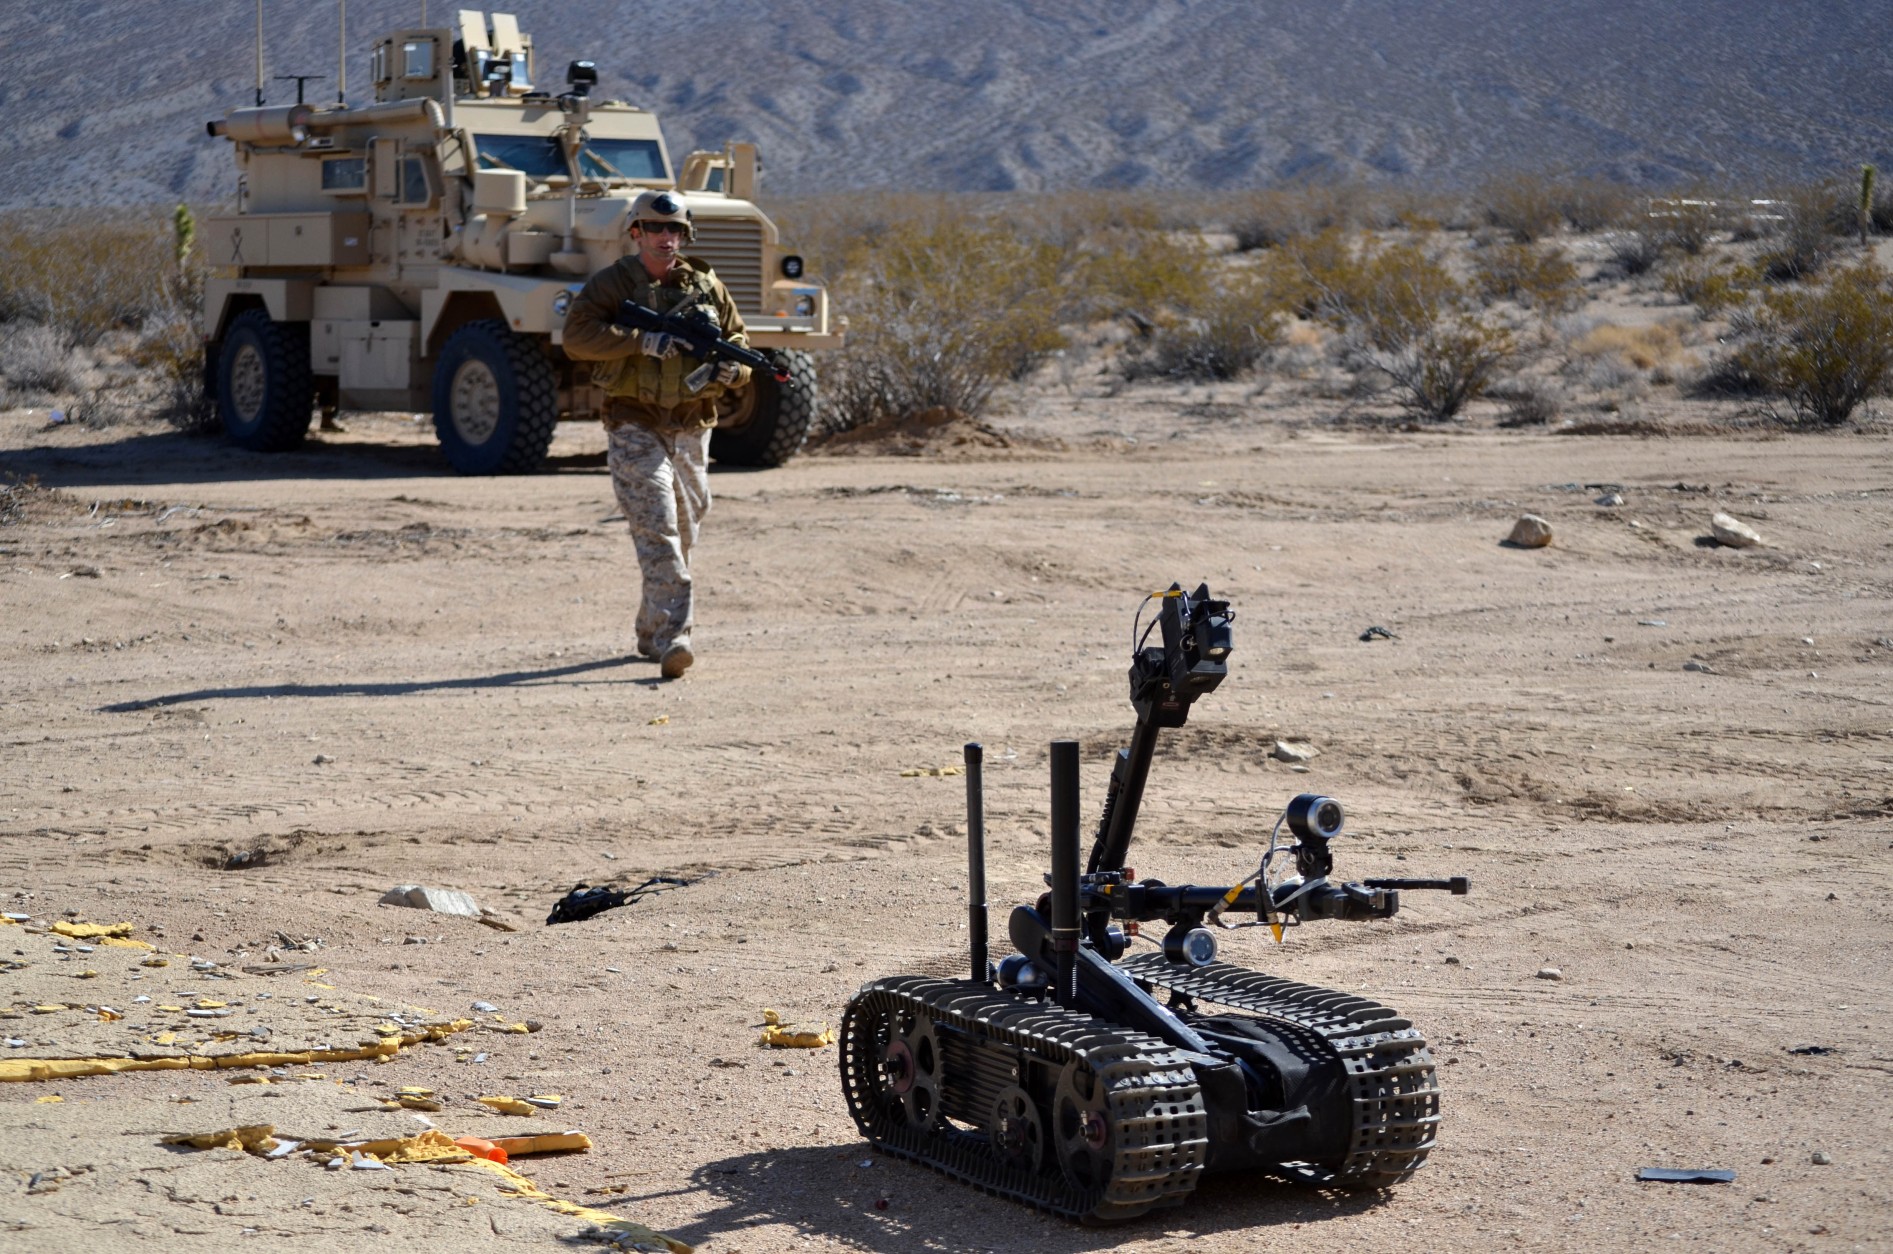 The Future is Here: How the Military Uses | RobotShop Community